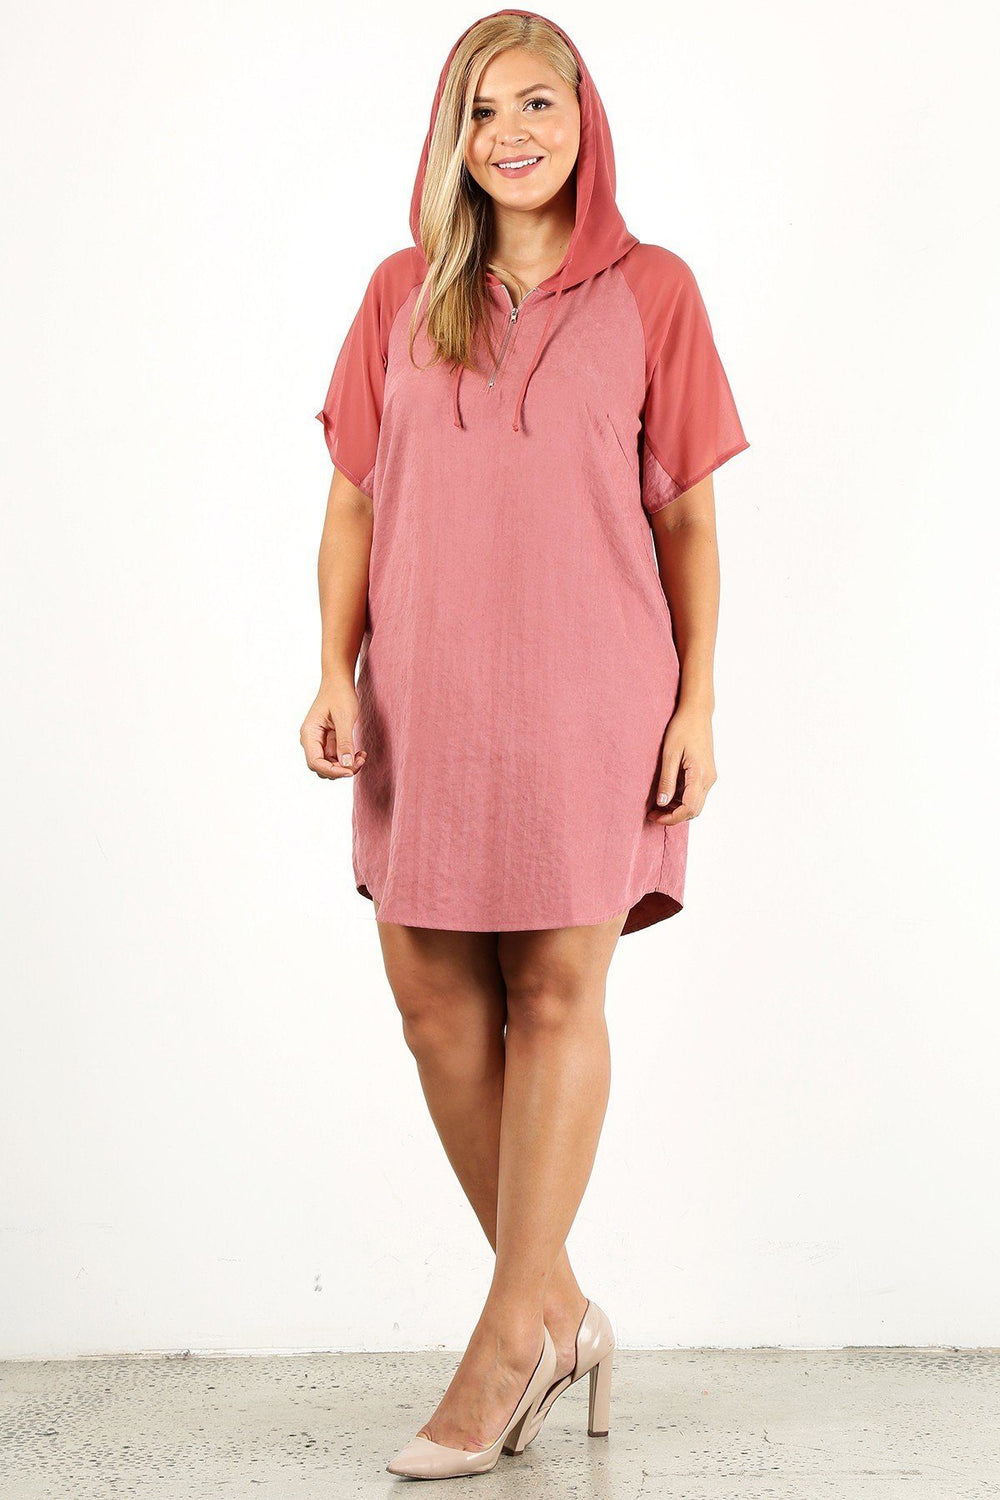 Plus Size Solid Mauve Dress with Zip-Up Closure and Hoodie